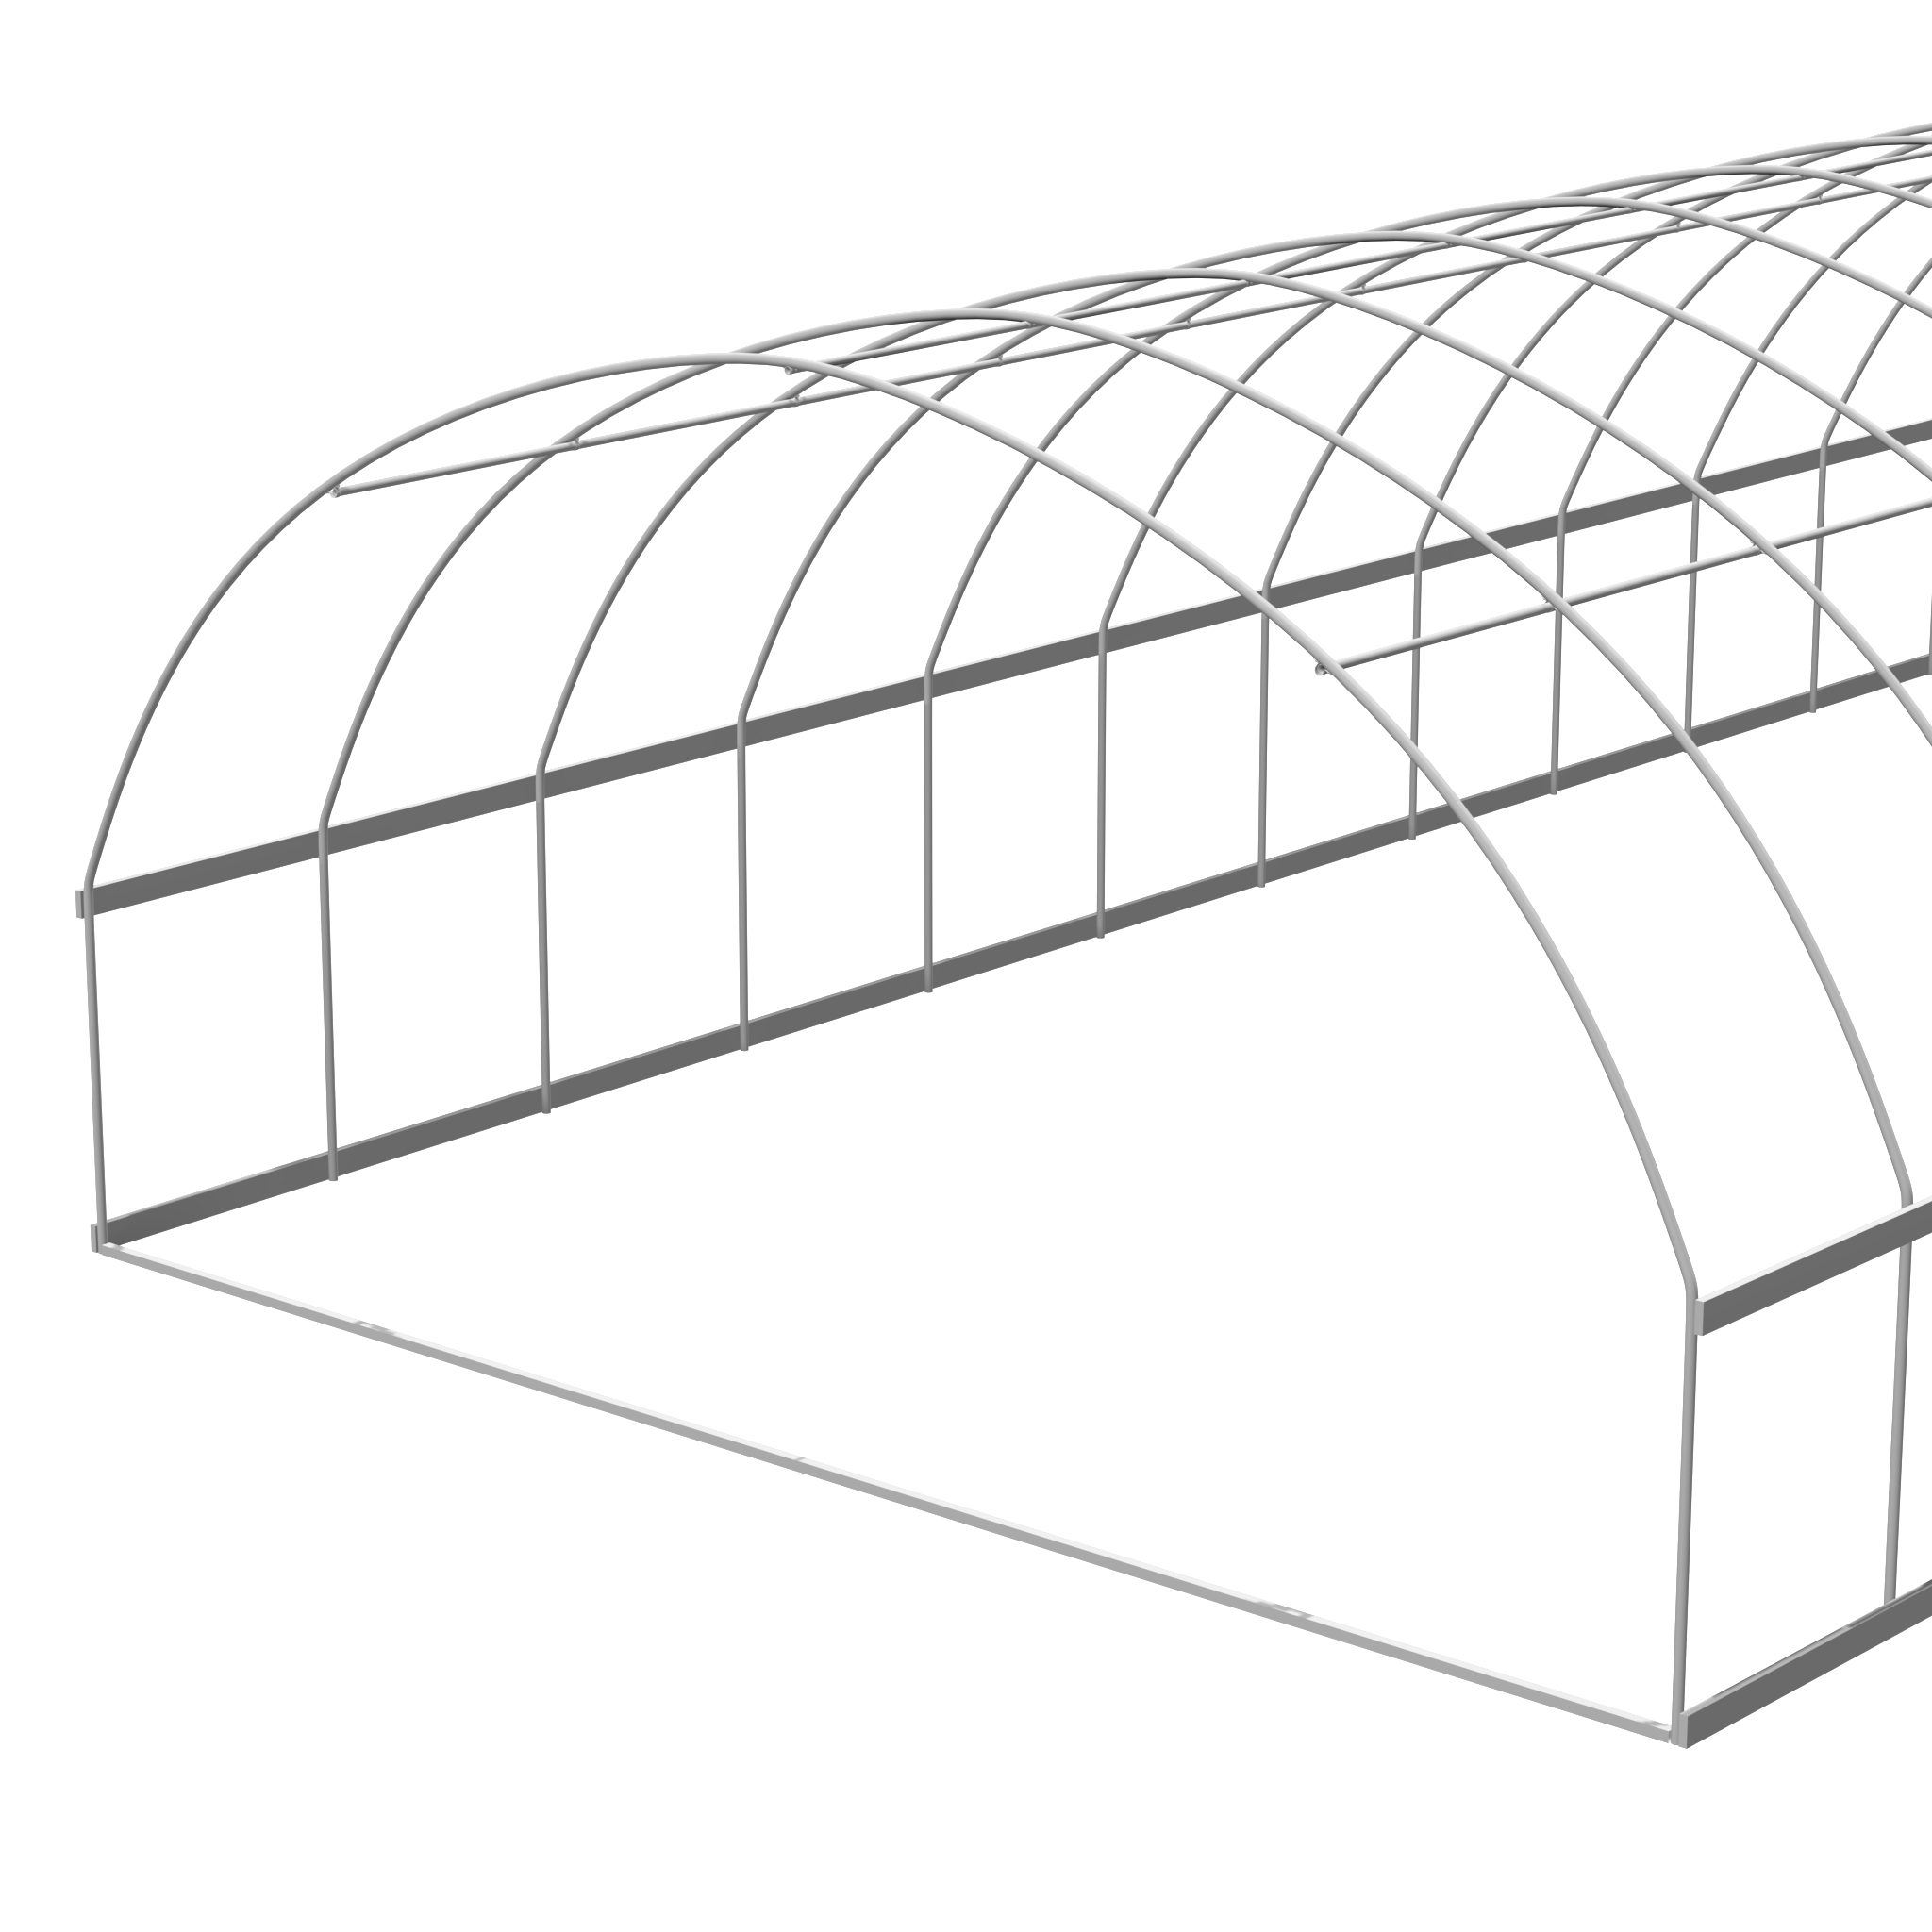 30'x45' Greenhouse Frame Quonset